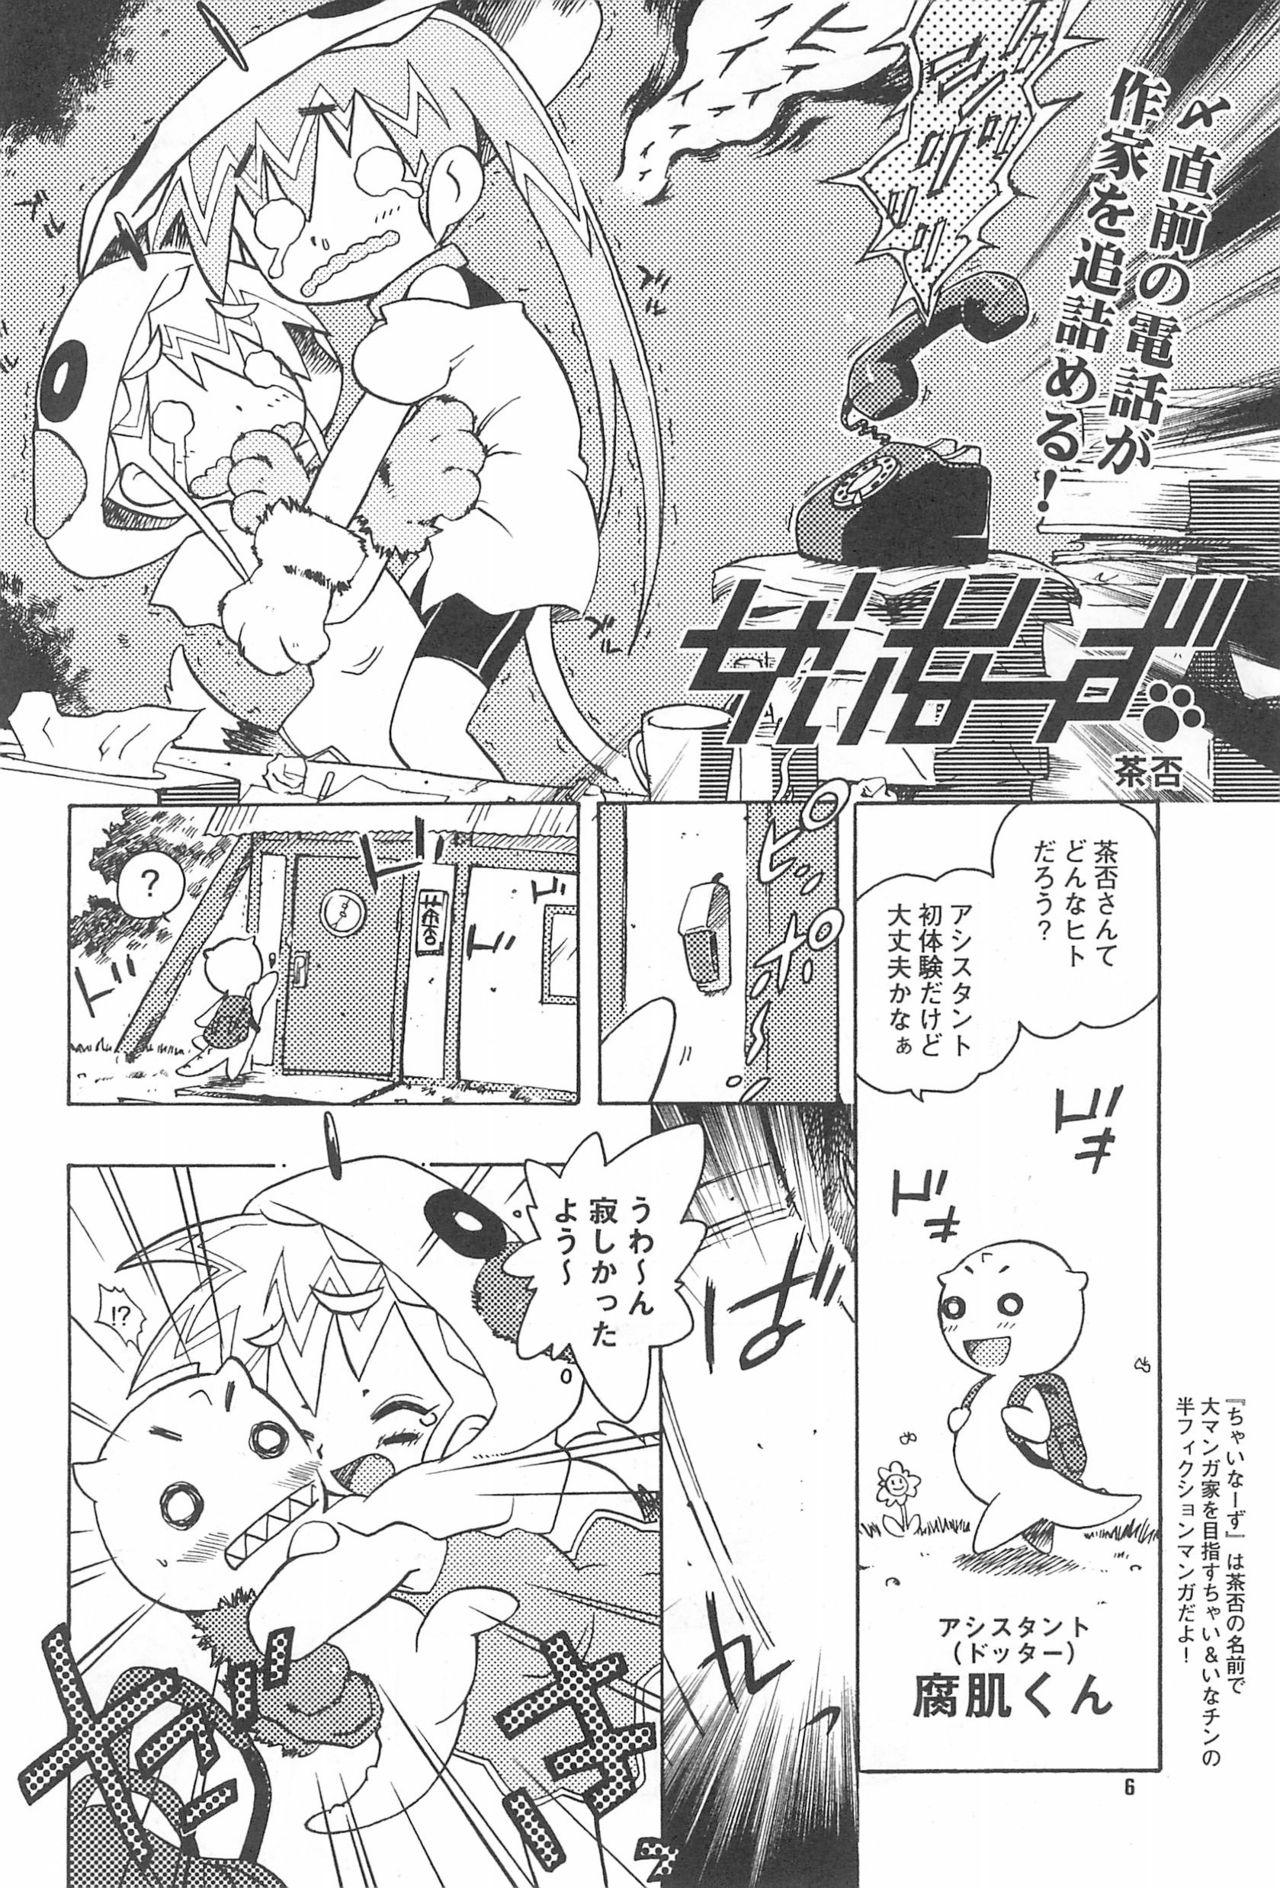 Breast Rokusai+2 Home - Page 6